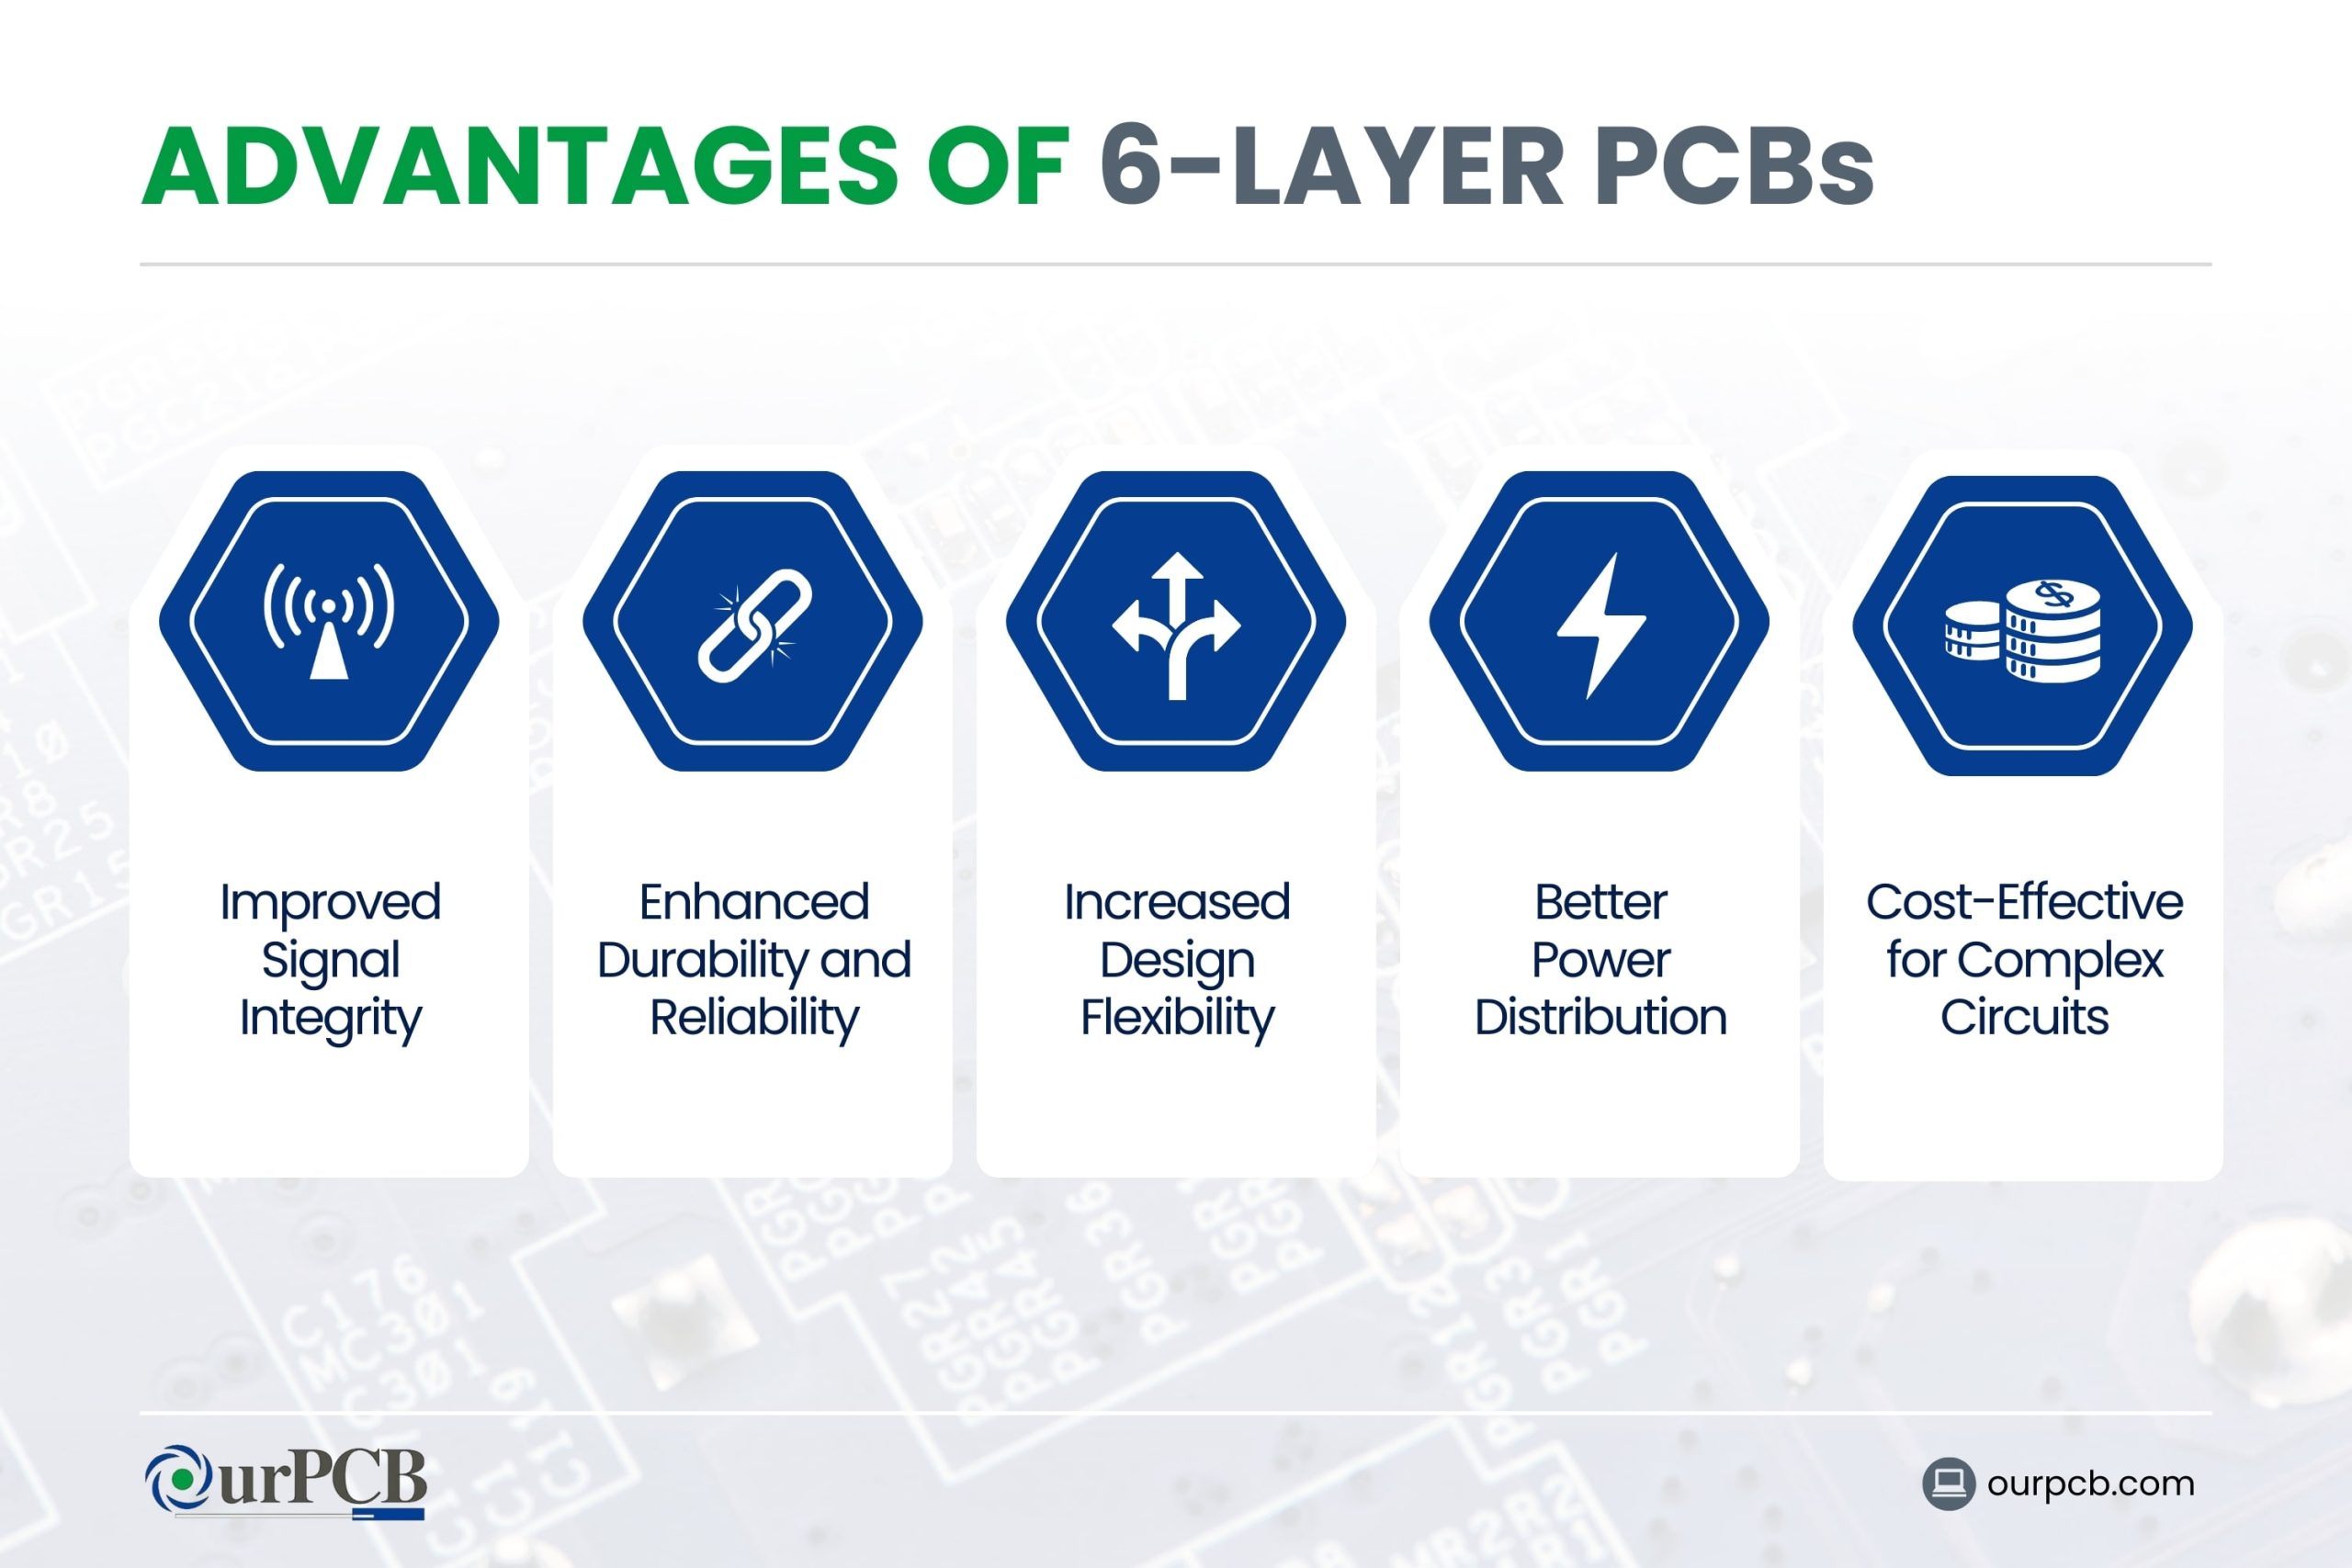 What Are the Advantages of 6-Layer PCBs?